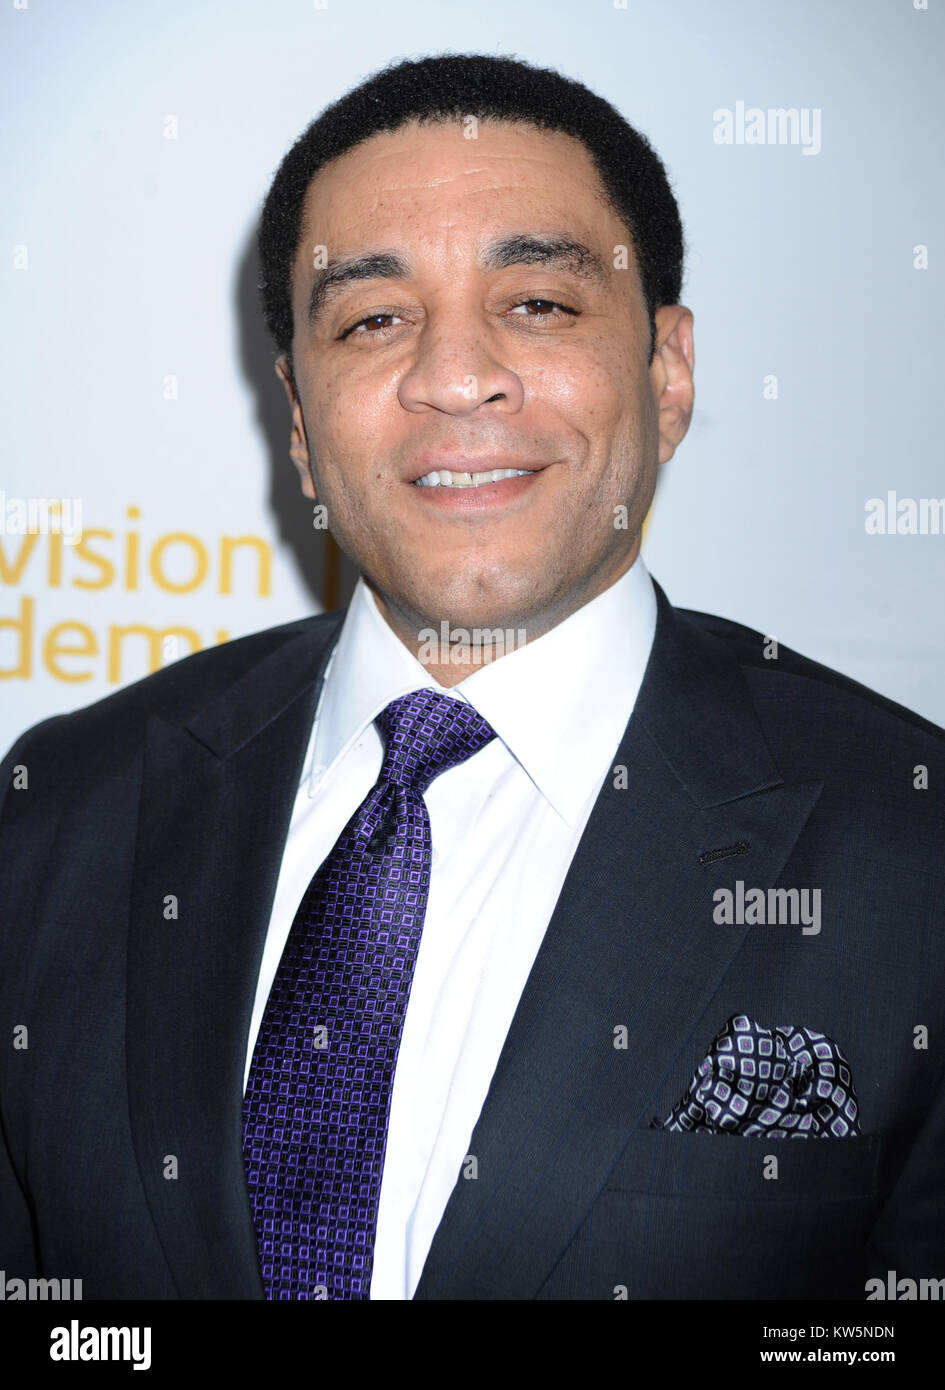 NEW YORK, NY - APRIL 02: Harry Lennix attends an evening with 'The Blacklist' at Florence Gould Hall on April 2, 2014 in New York Cit   People:  Harry Lennix Stock Photo